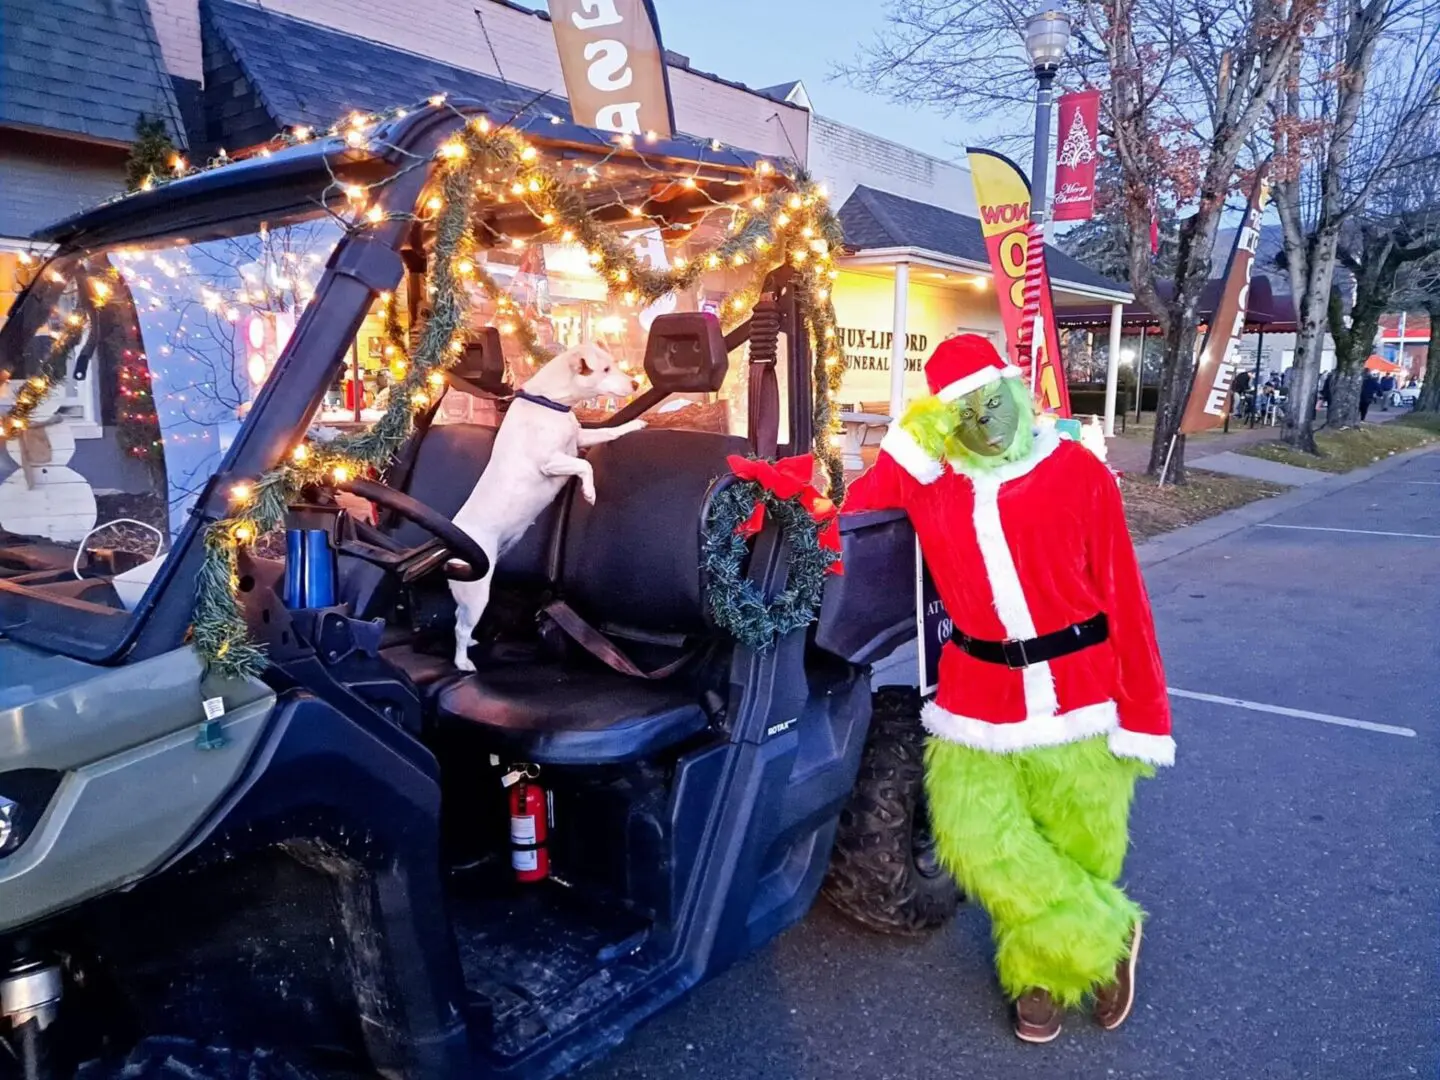 A person dressed as santa clause and a grinch